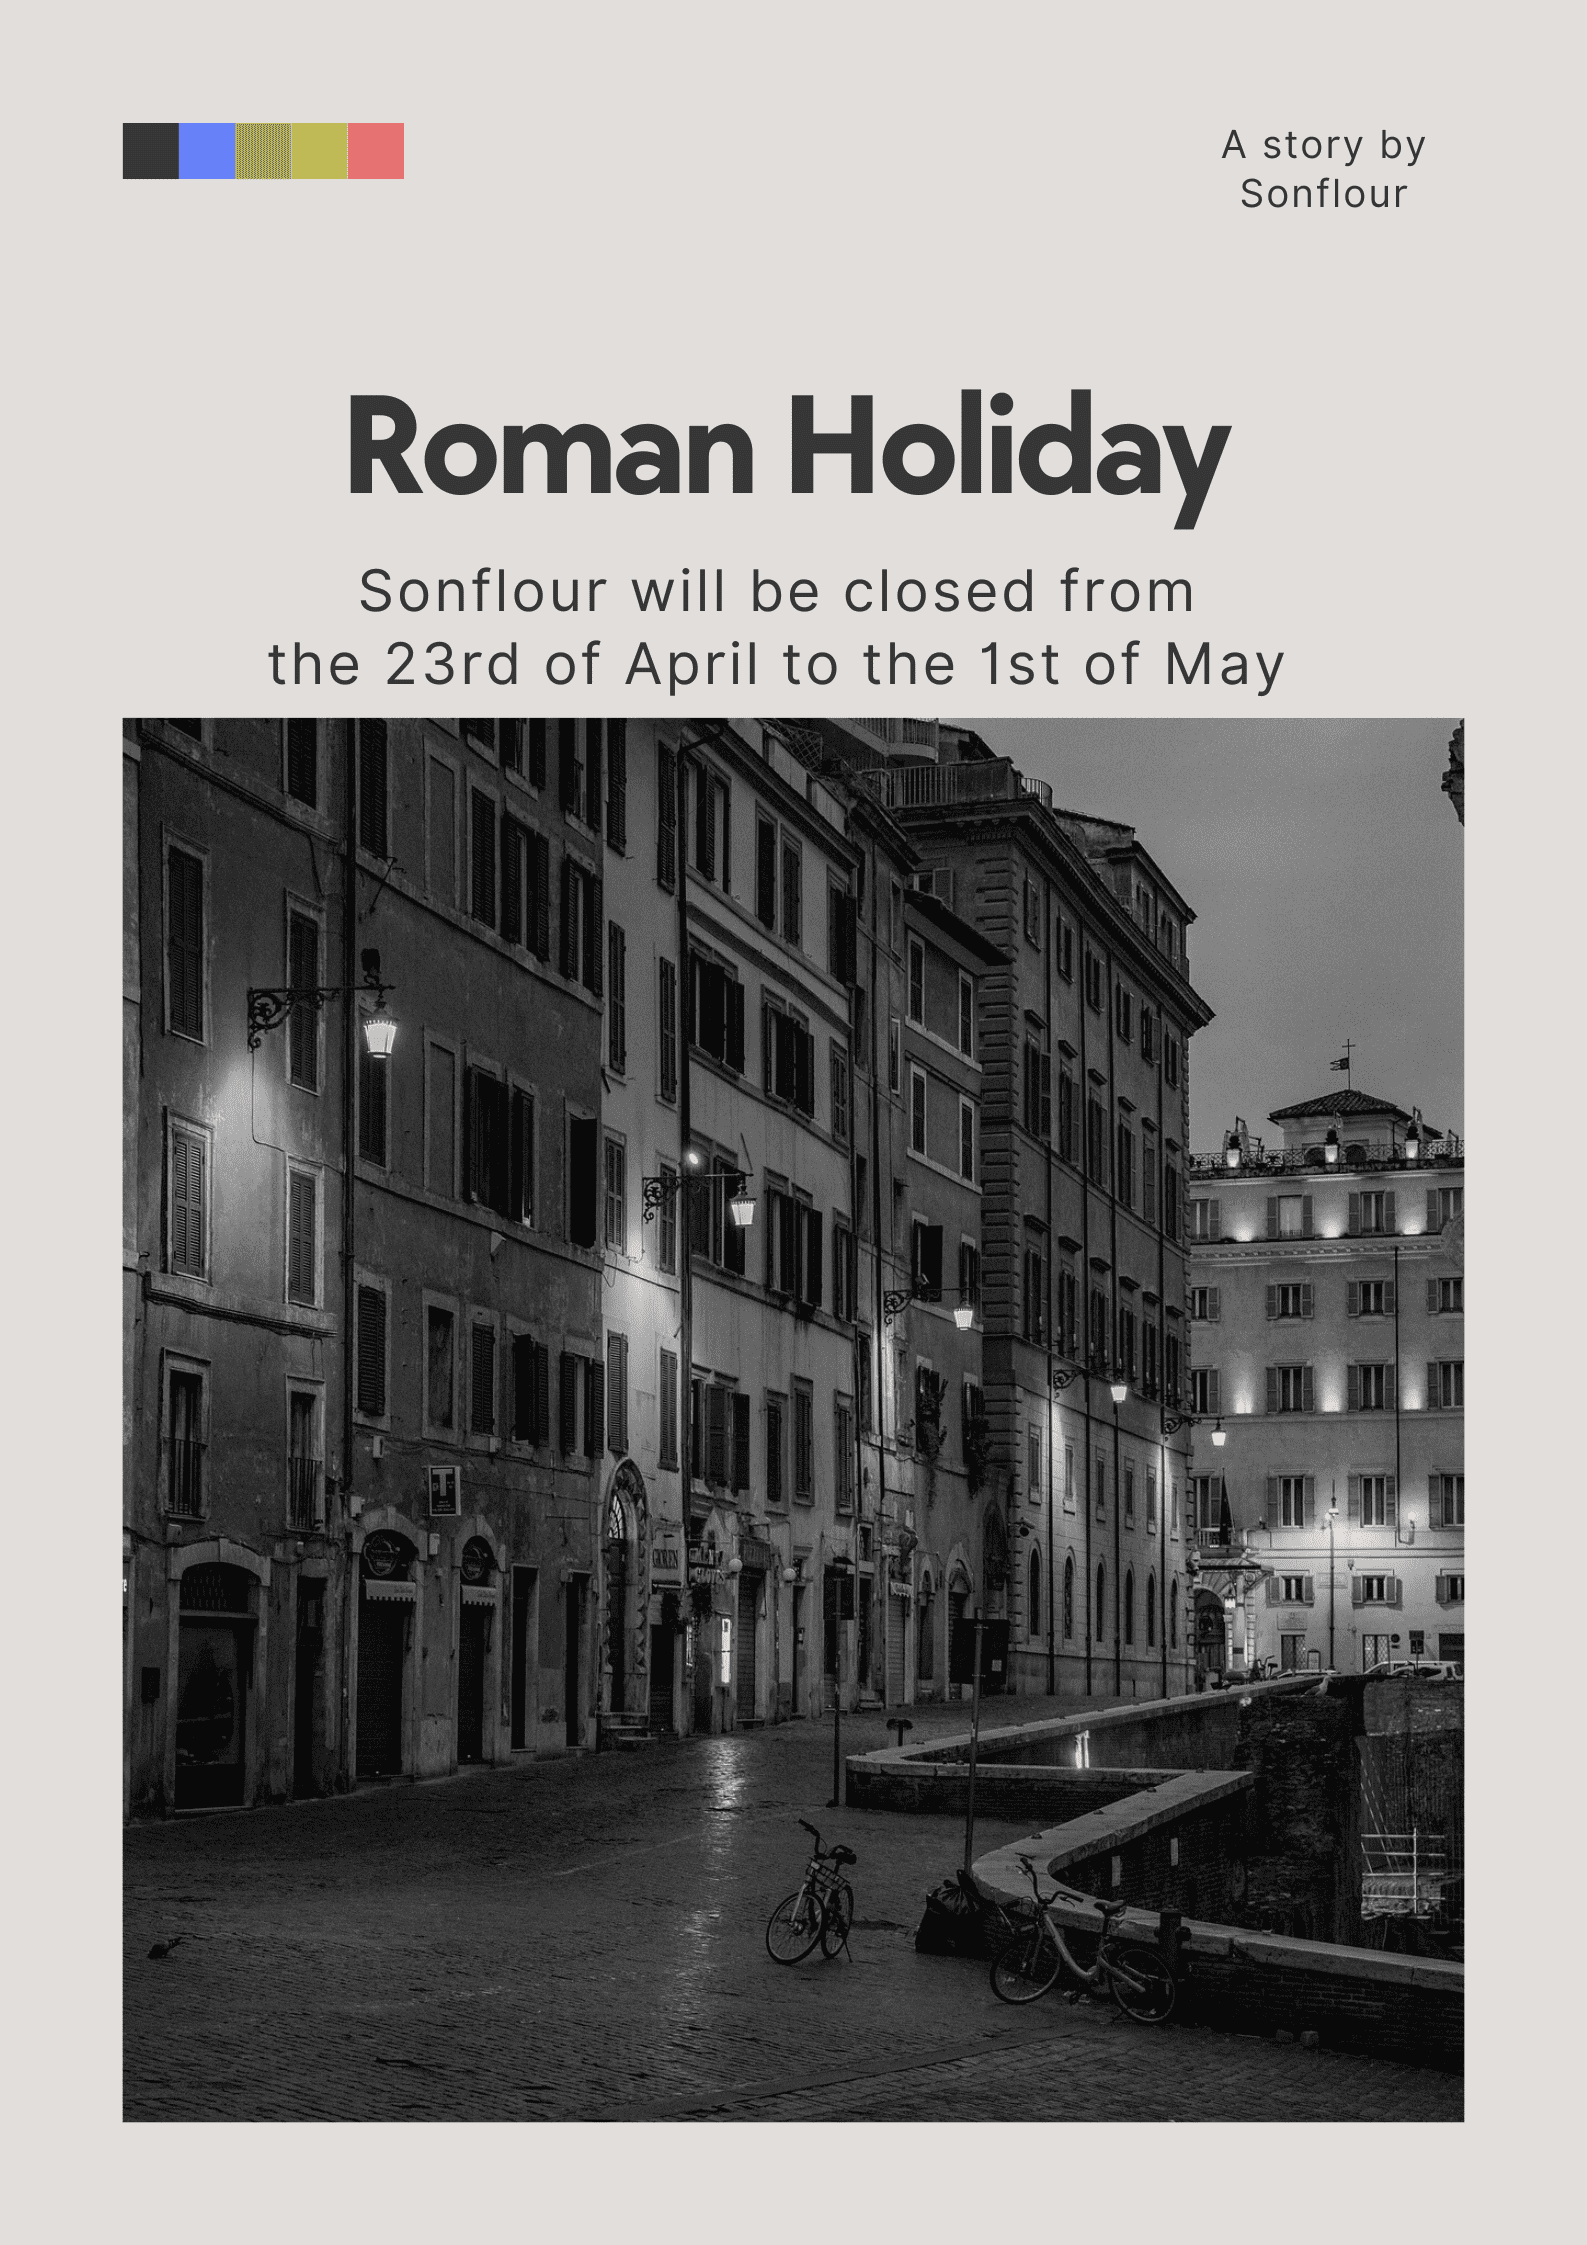 It's roman holiday time!